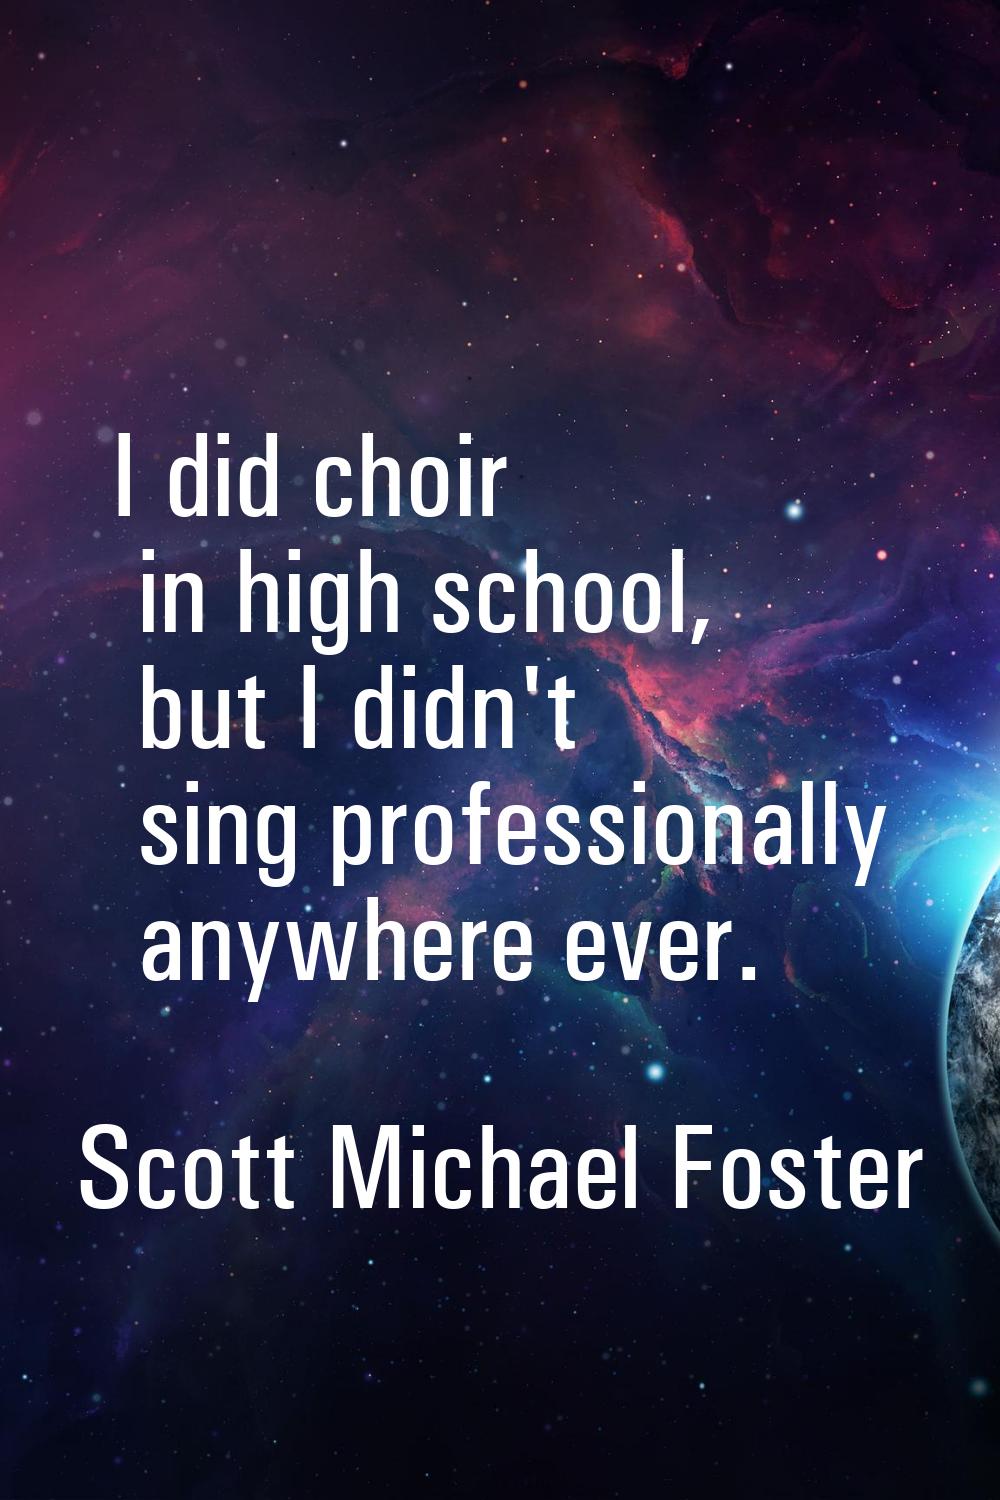 I did choir in high school, but I didn't sing professionally anywhere ever.